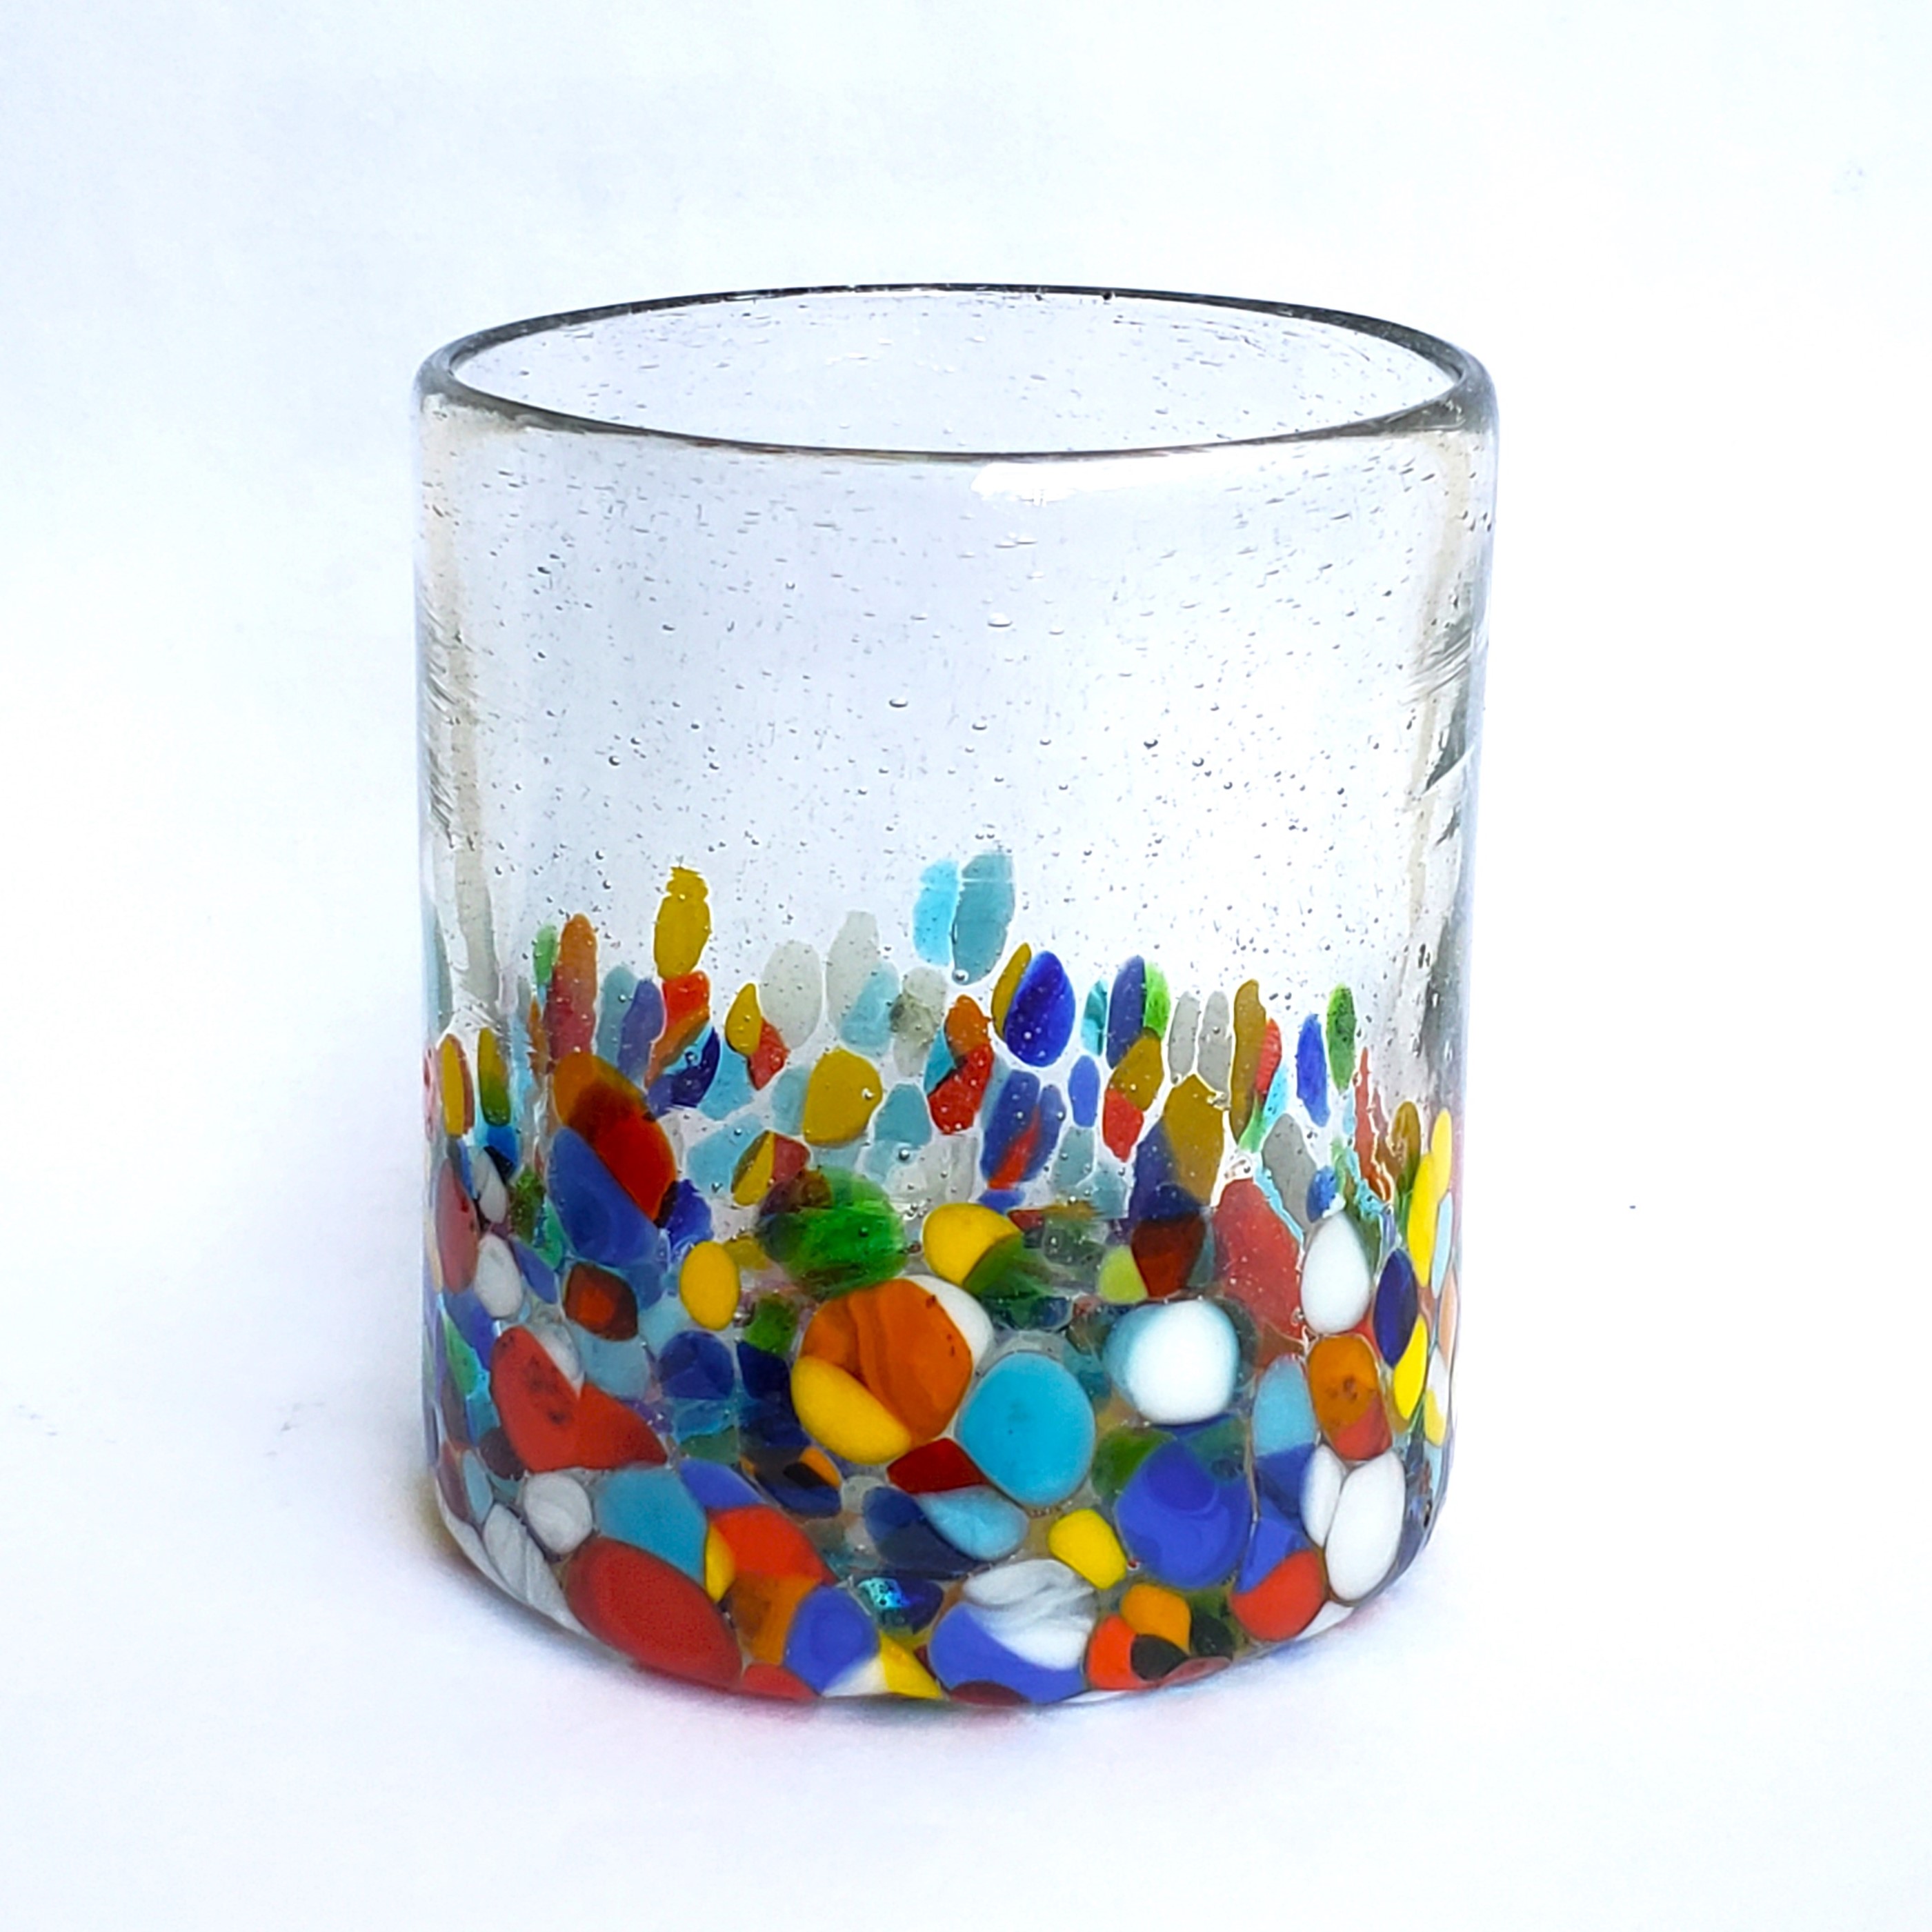 Vasos de Vidrio Soplado al Mayoreo / fetti 9 oz Short Tumblers (set of 6) / Our Clear & Confetti Glassware combines the best of two worlds: clear, thick, sturdy handcrafted glass on top, meets the colorful, festive, confetti bottom! These glasses will sure be a standout in any table setting or as a fabulous gift for your loved ones. Crafted one by one by skilled artisans in Tonala, Mexico, each glass is different from the next making them unique works of art. You'll be amazed at how they make having a simple glass of water a happier experience. Made from eco-friendly recycled glass.